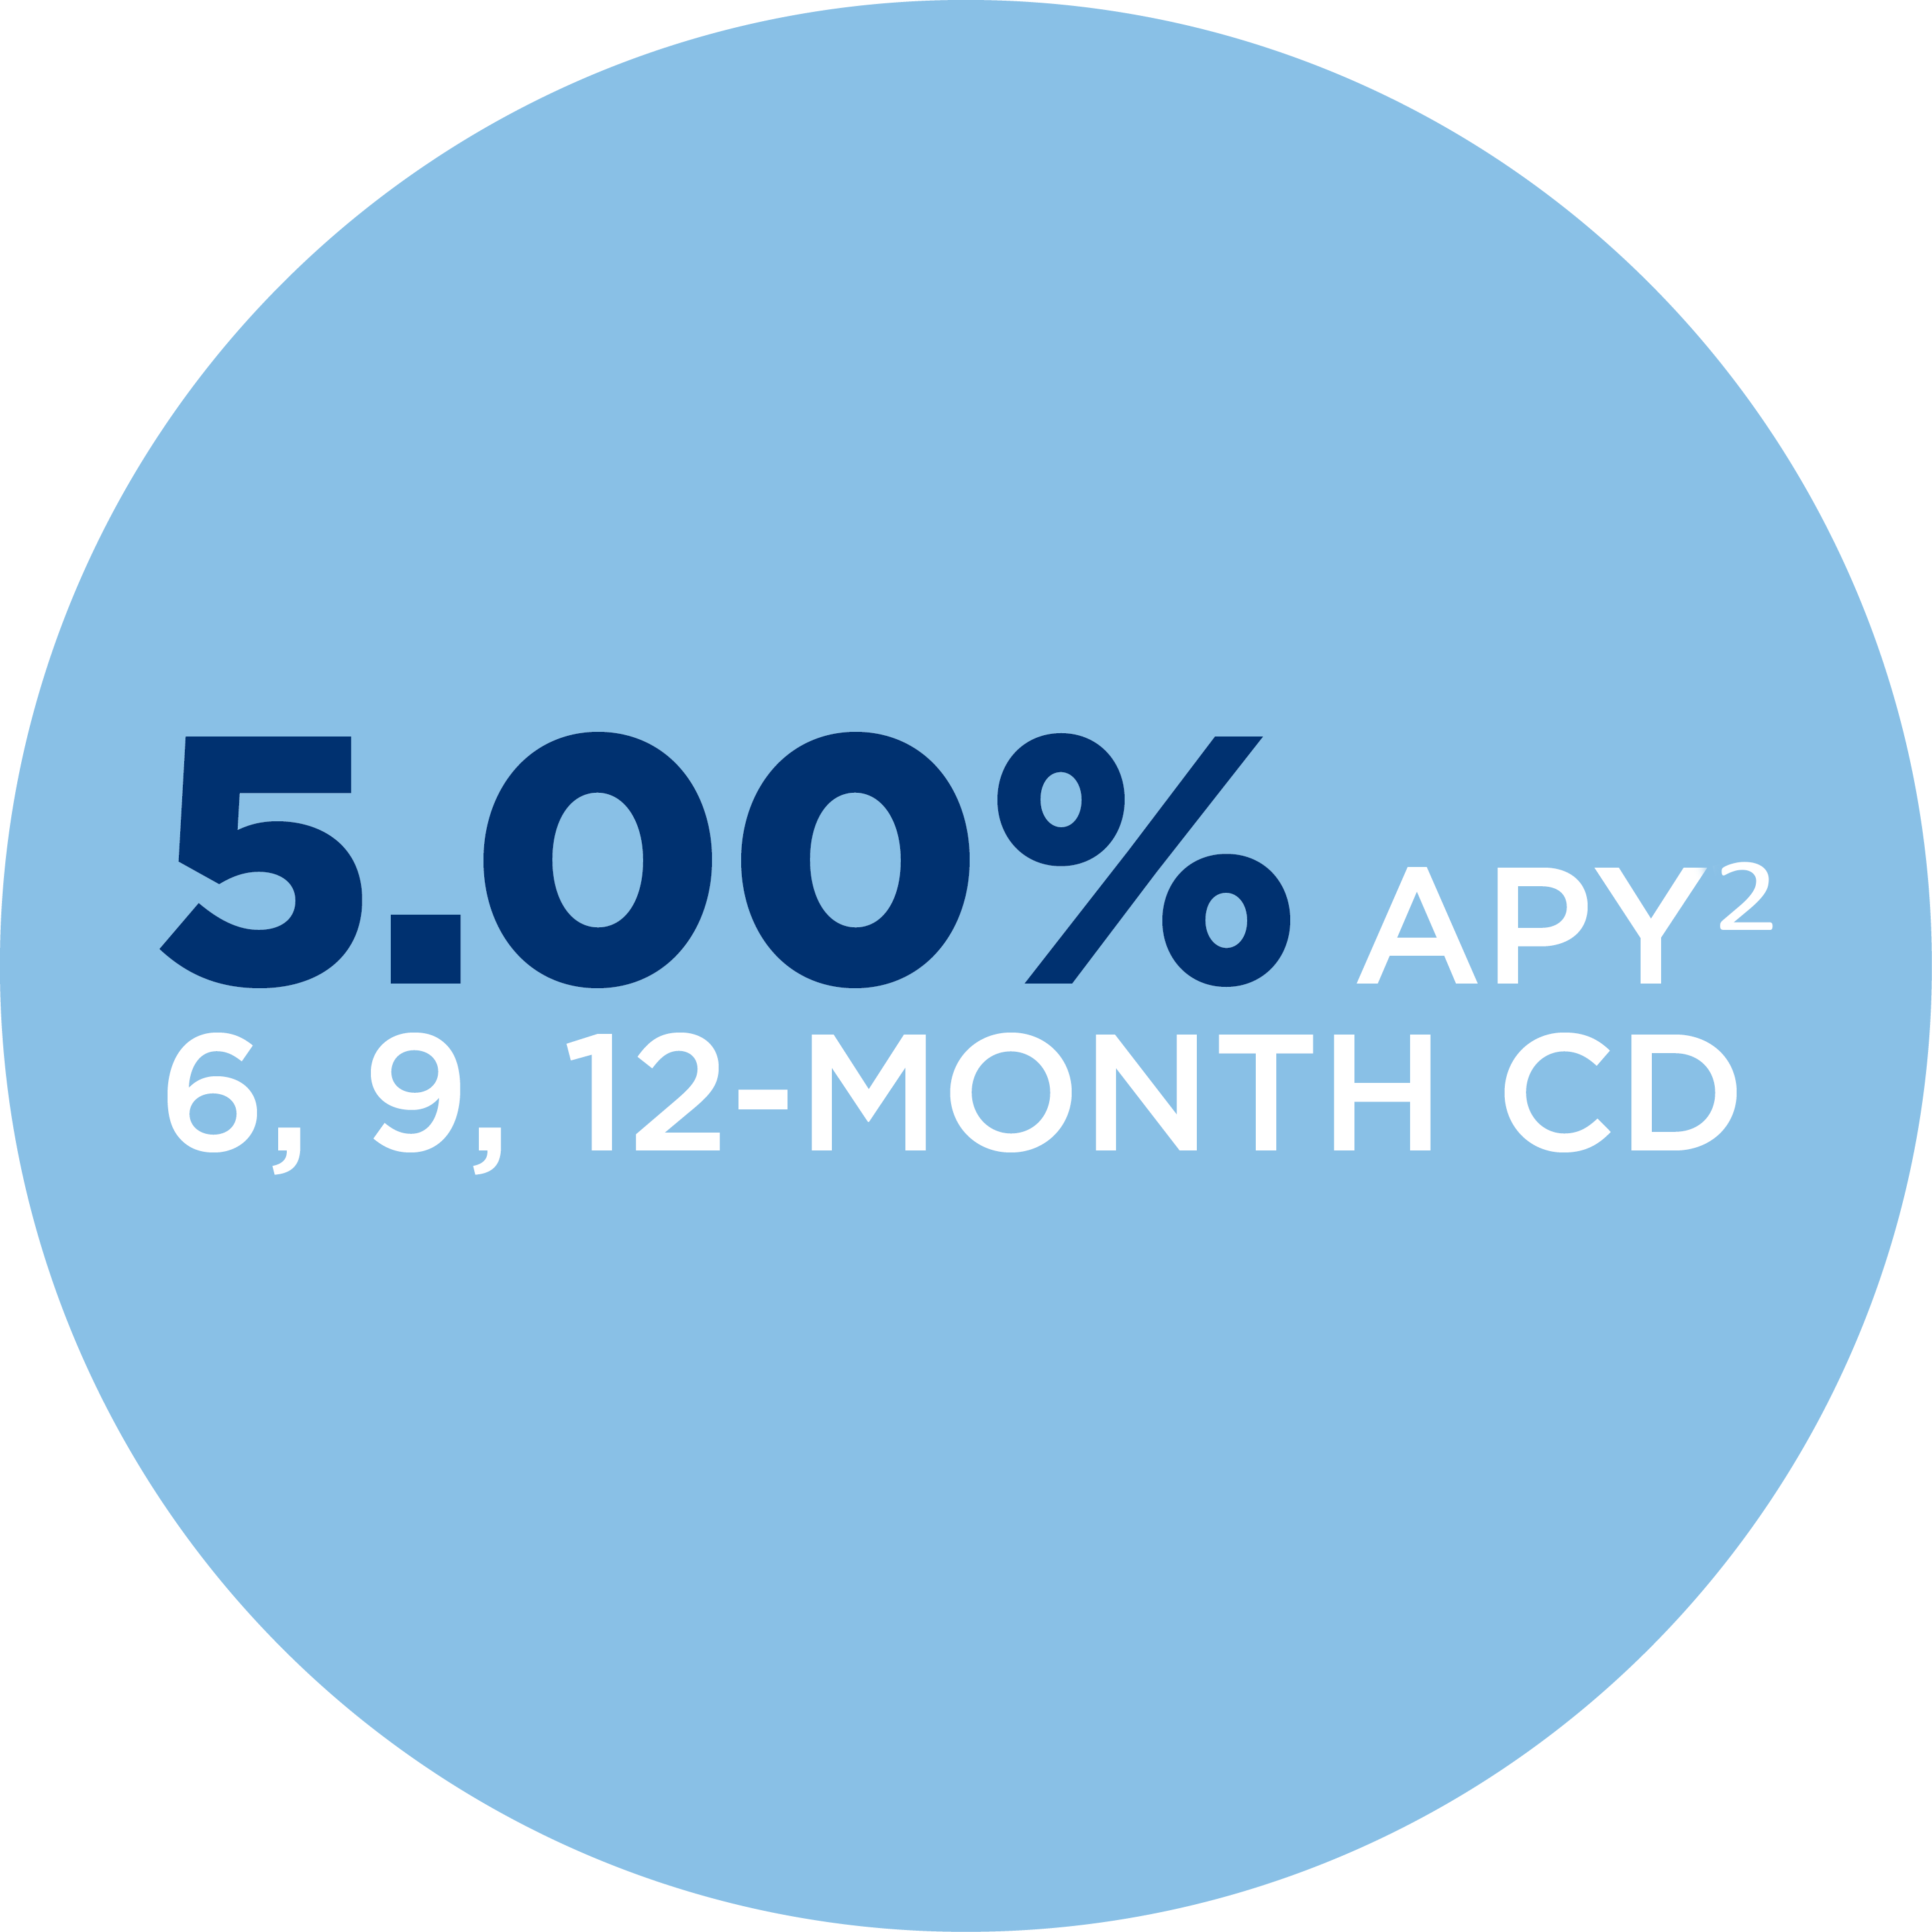 5.00% APY2 for the 6, 9, and 12-month special cd